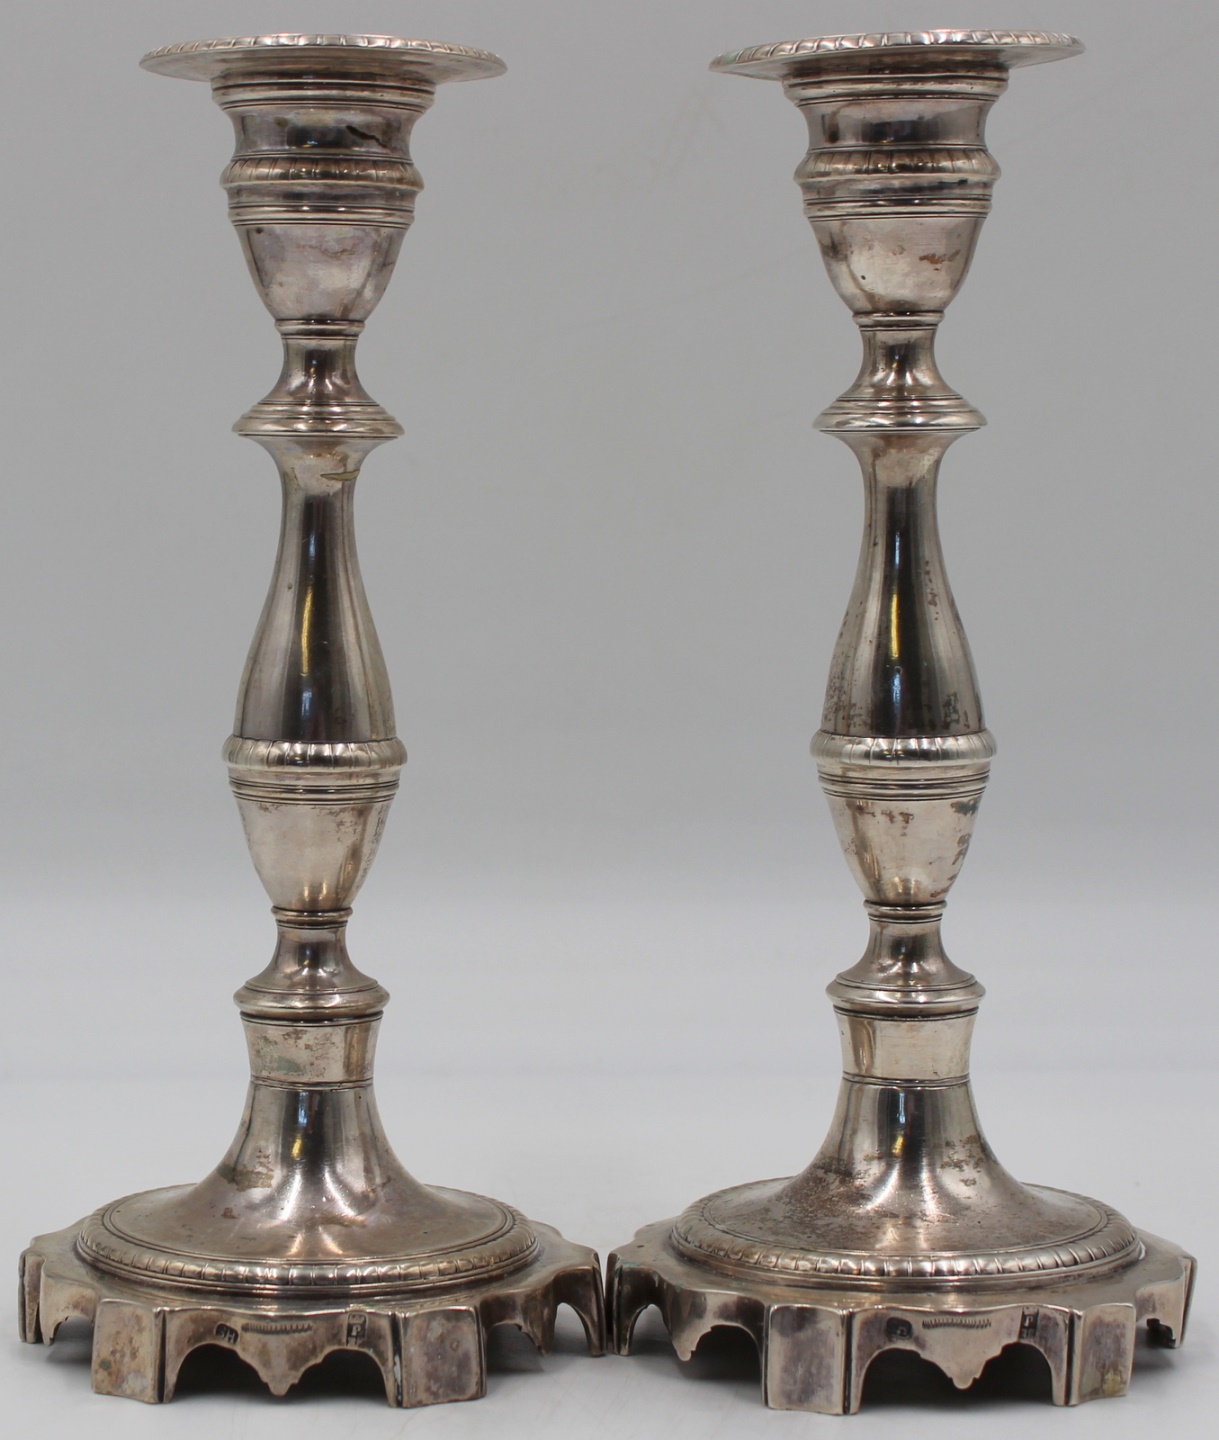 SILVER. PAIR OF PORTUGUESE SILVER